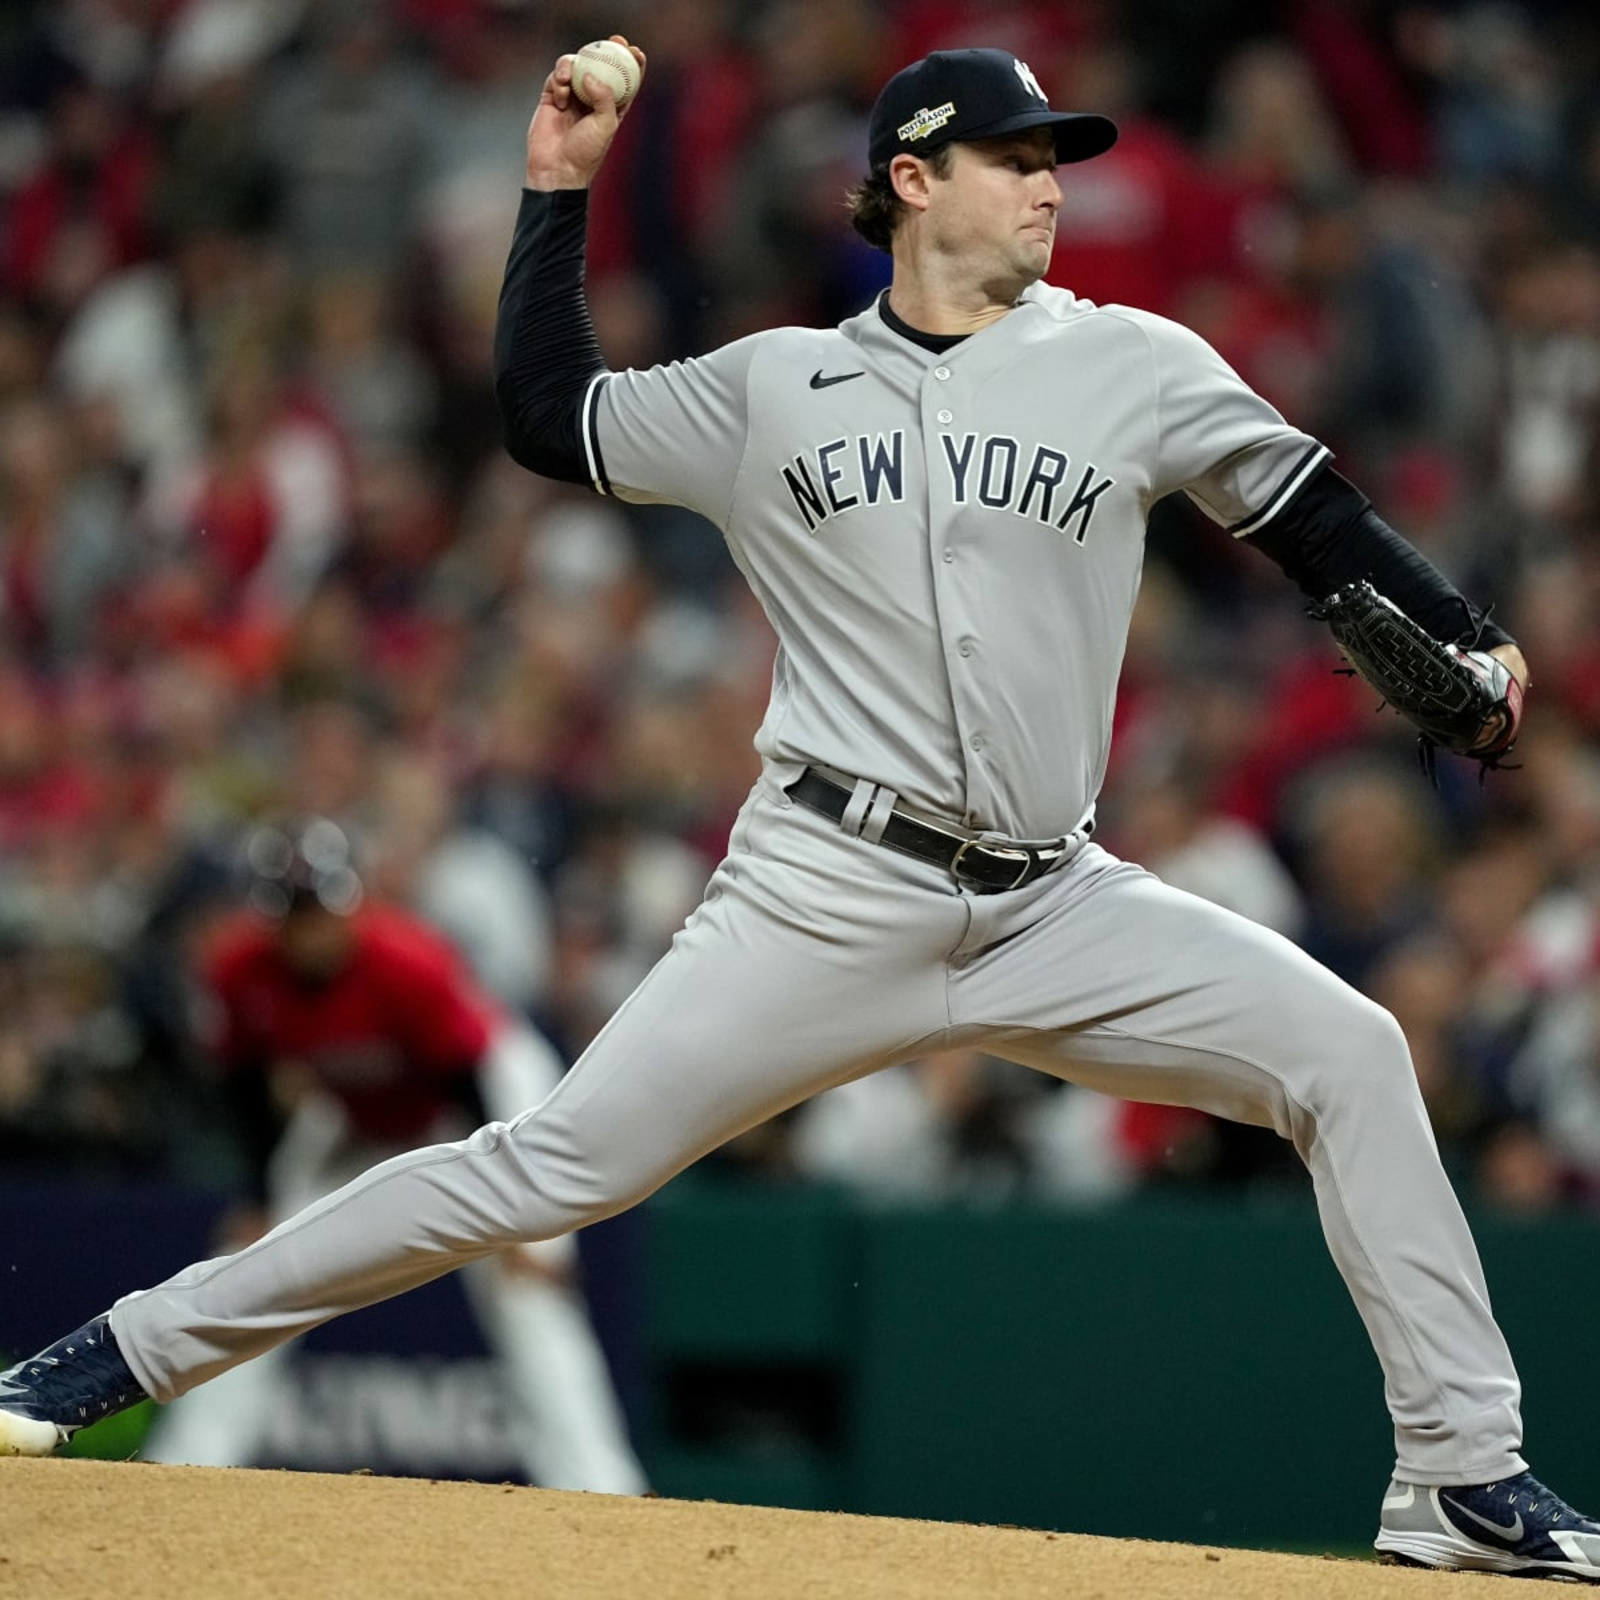 New York Yankees will face Houston Astros in ALCS after Gerrit Cole gem